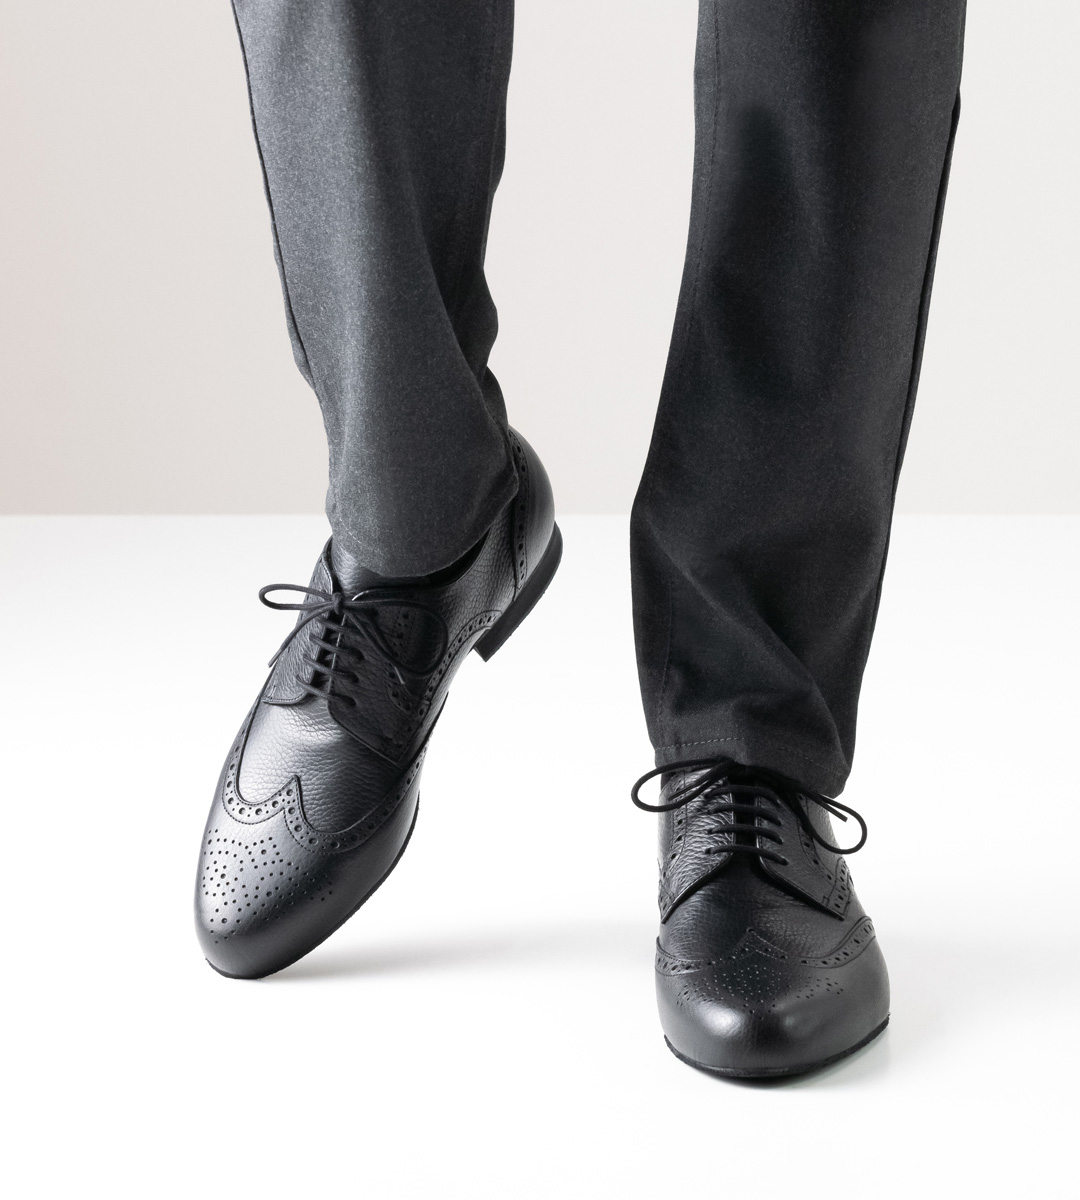 Men's dance shoe in black leather with 2 cm high heel in combination with grey trousers